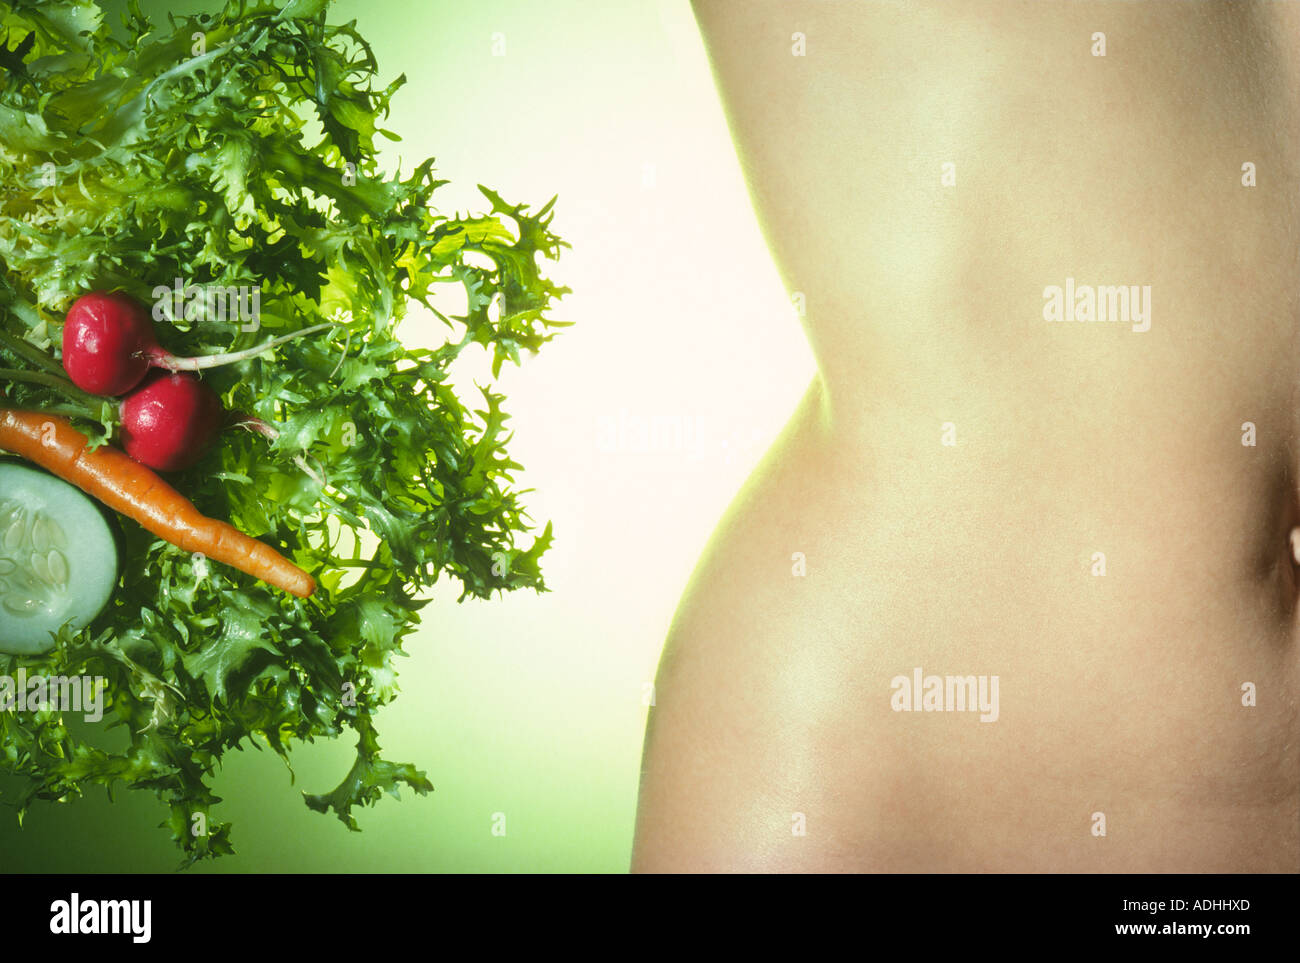 Close up of nude female torso with salad Stock Photo